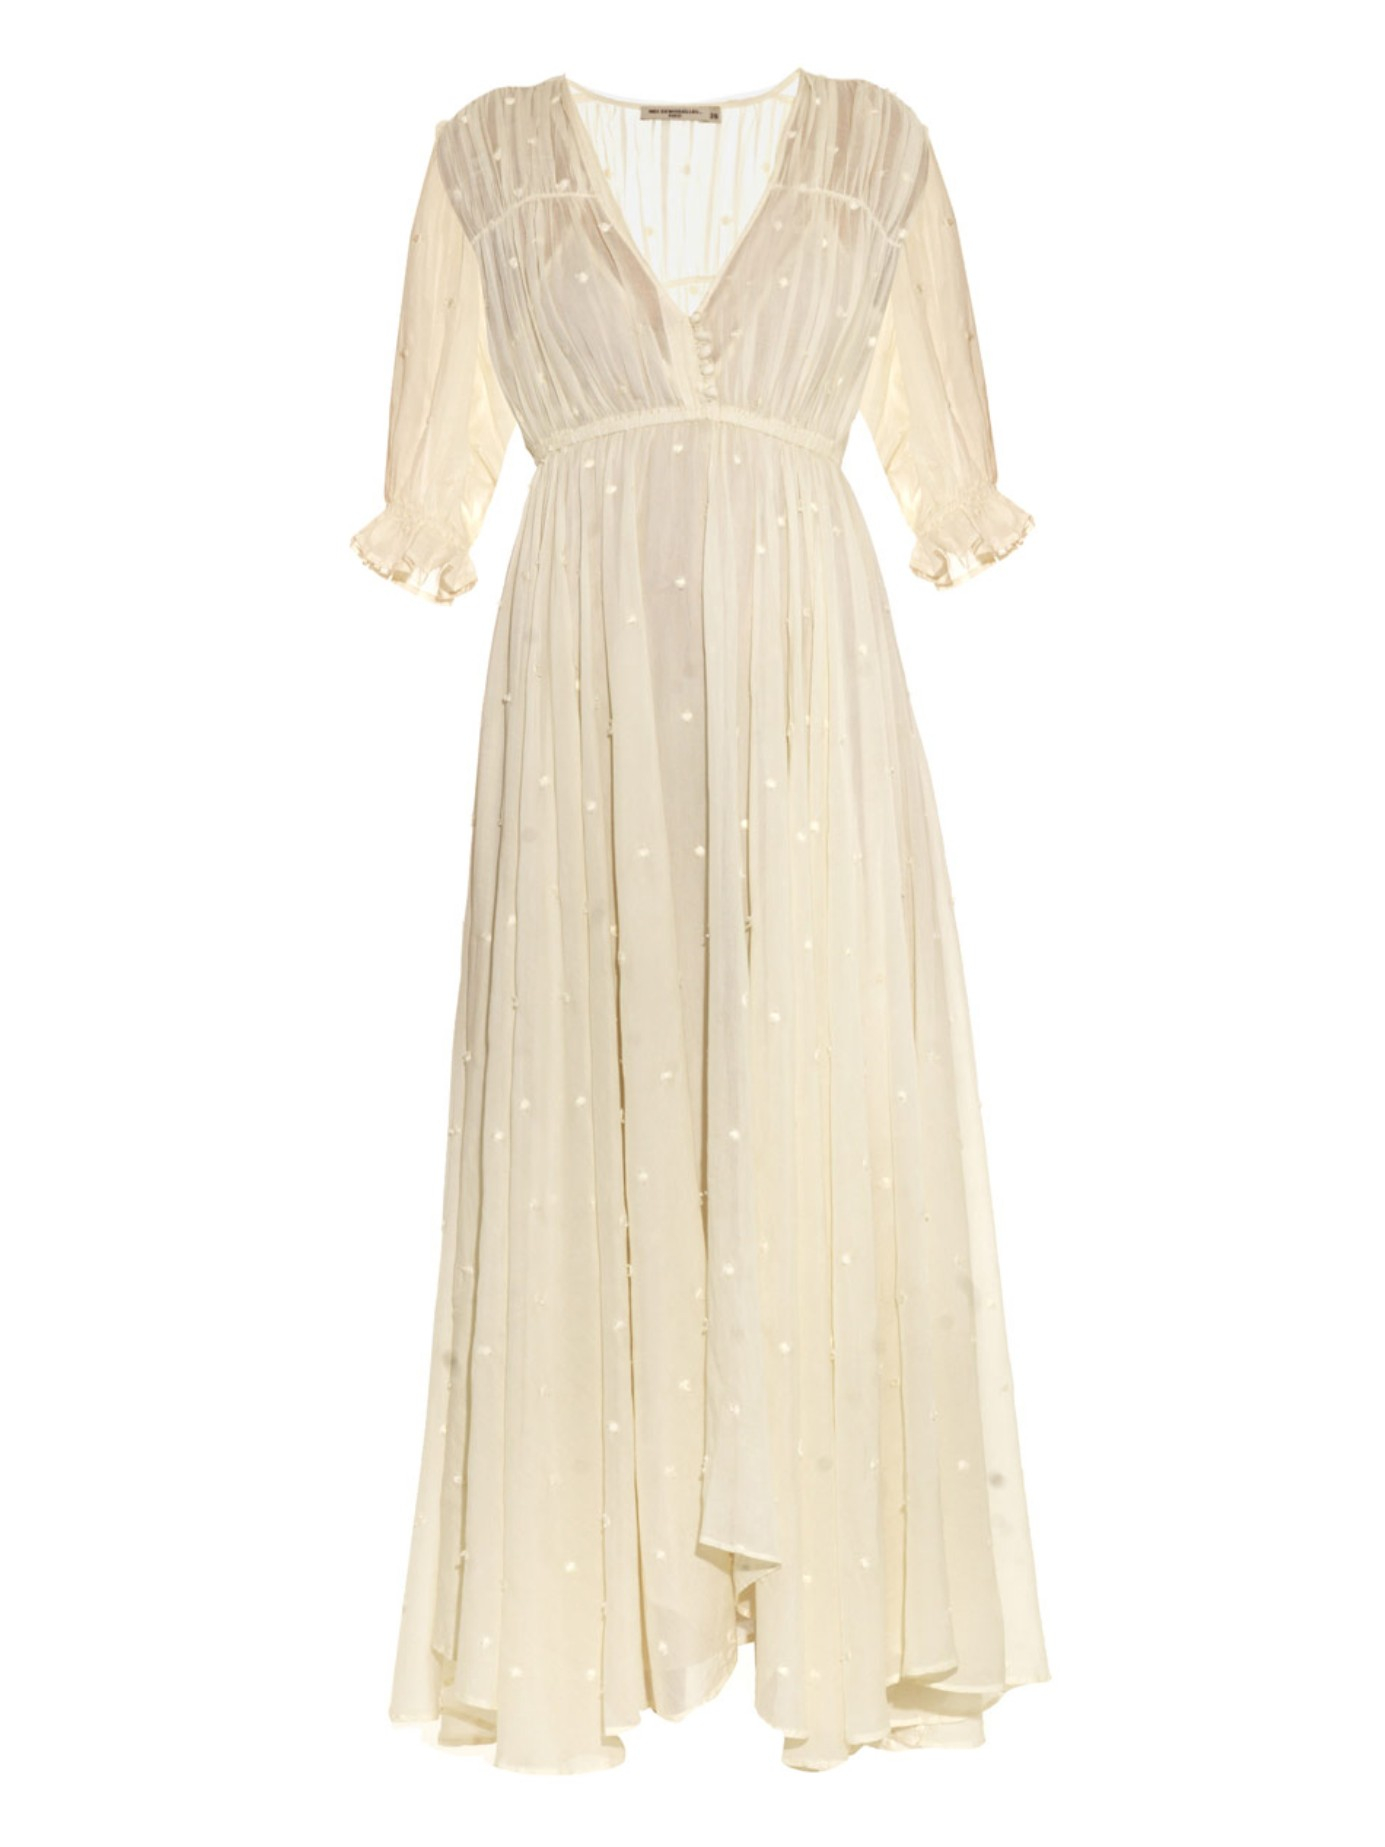 Lyst - Mes Demoiselles Louise Embroidered Cotton-gauze Dress in White